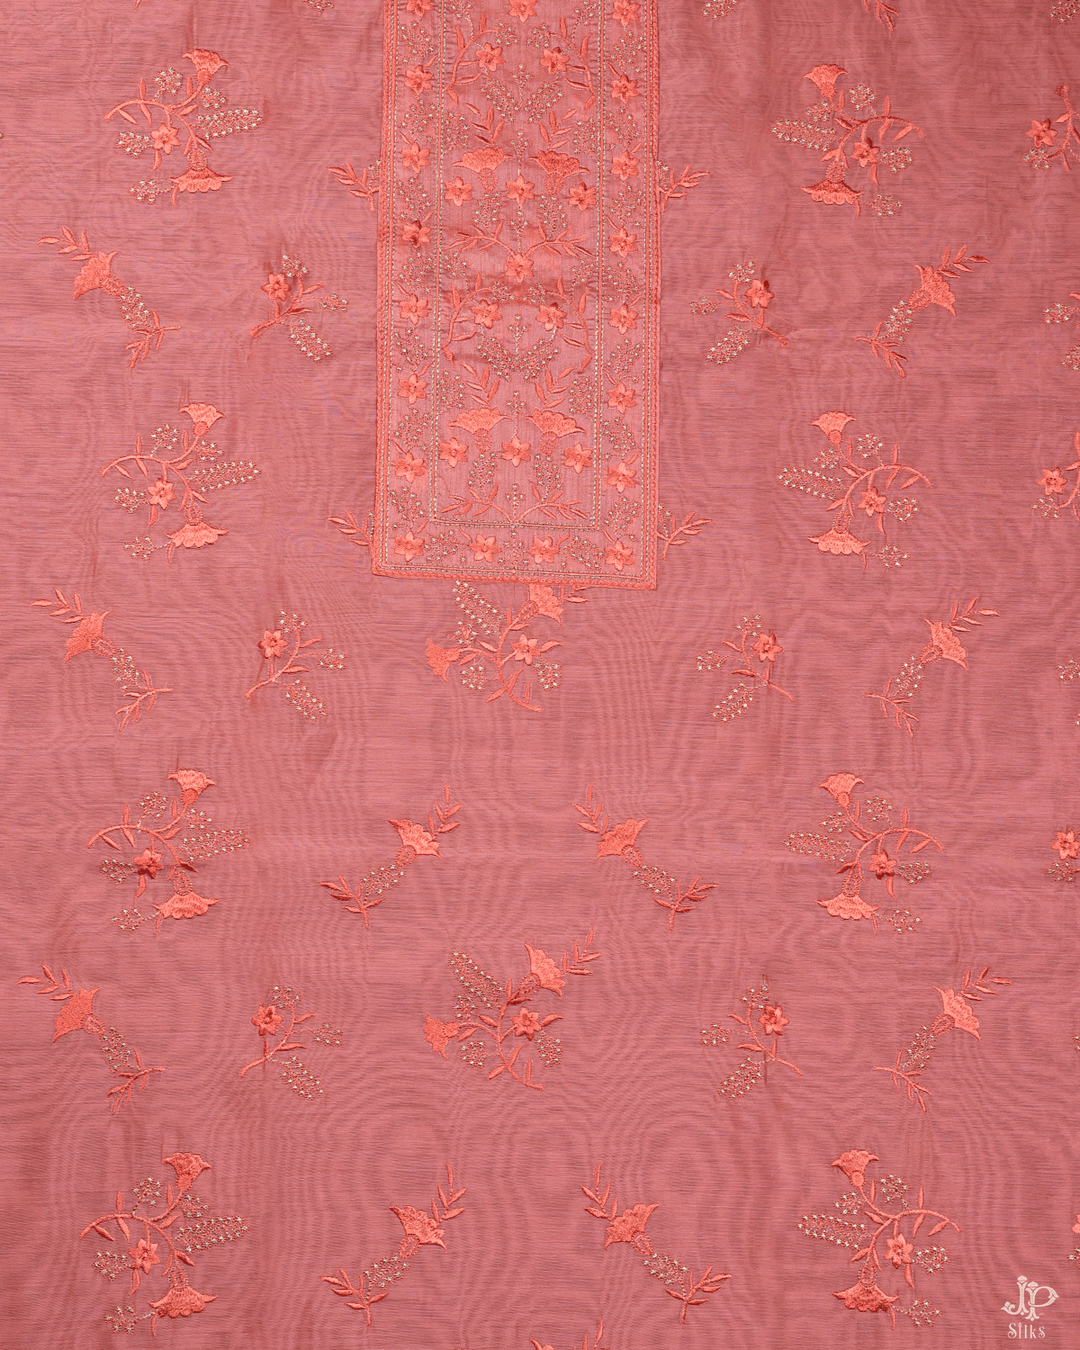 Peach Unstitched Chudidhar Material - D6645 - View 4